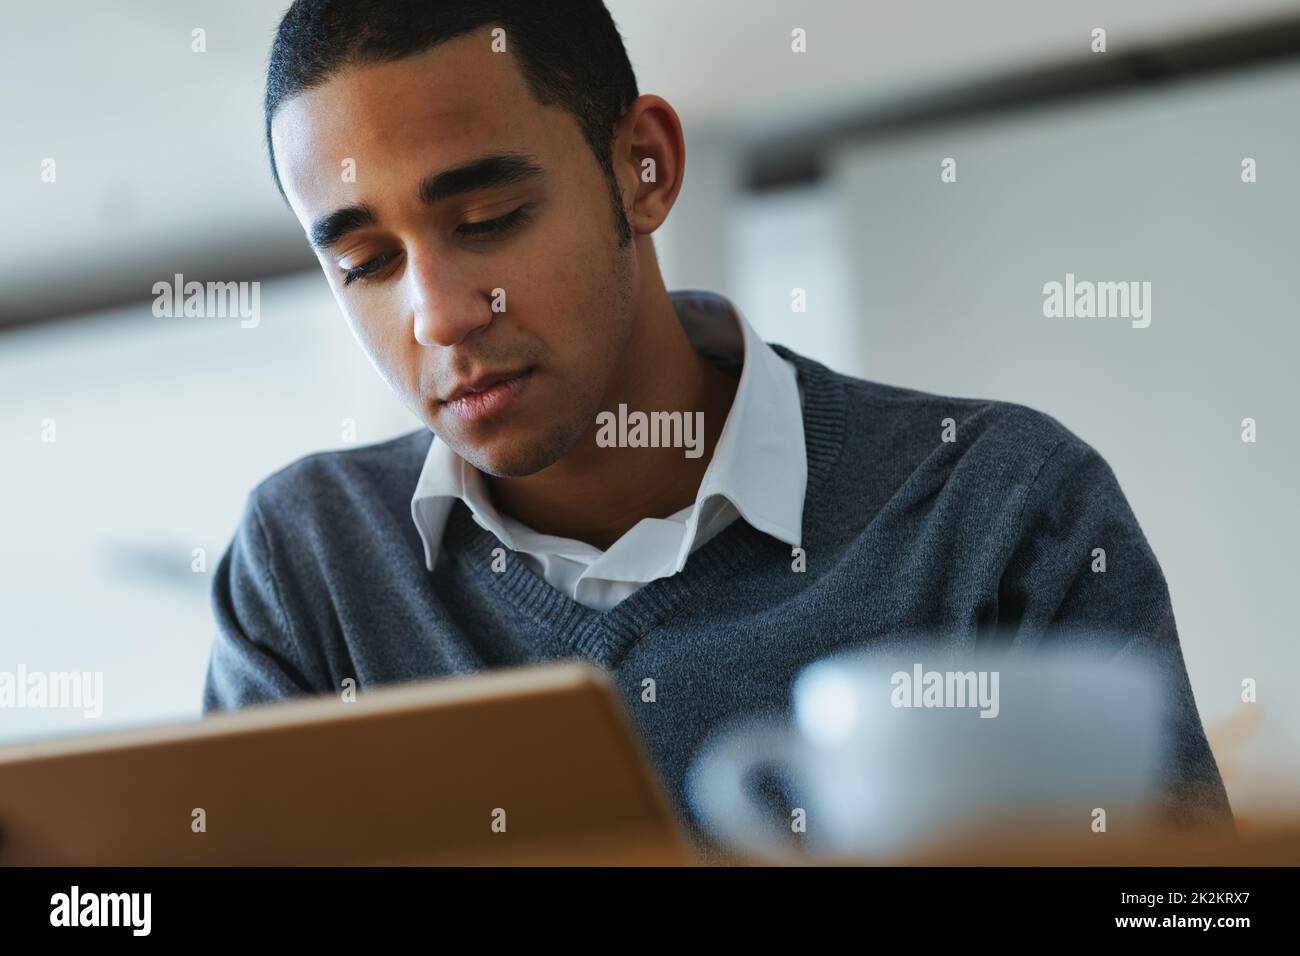 Serious young Black man engrossed in reading on a tablet pc Stock Photo